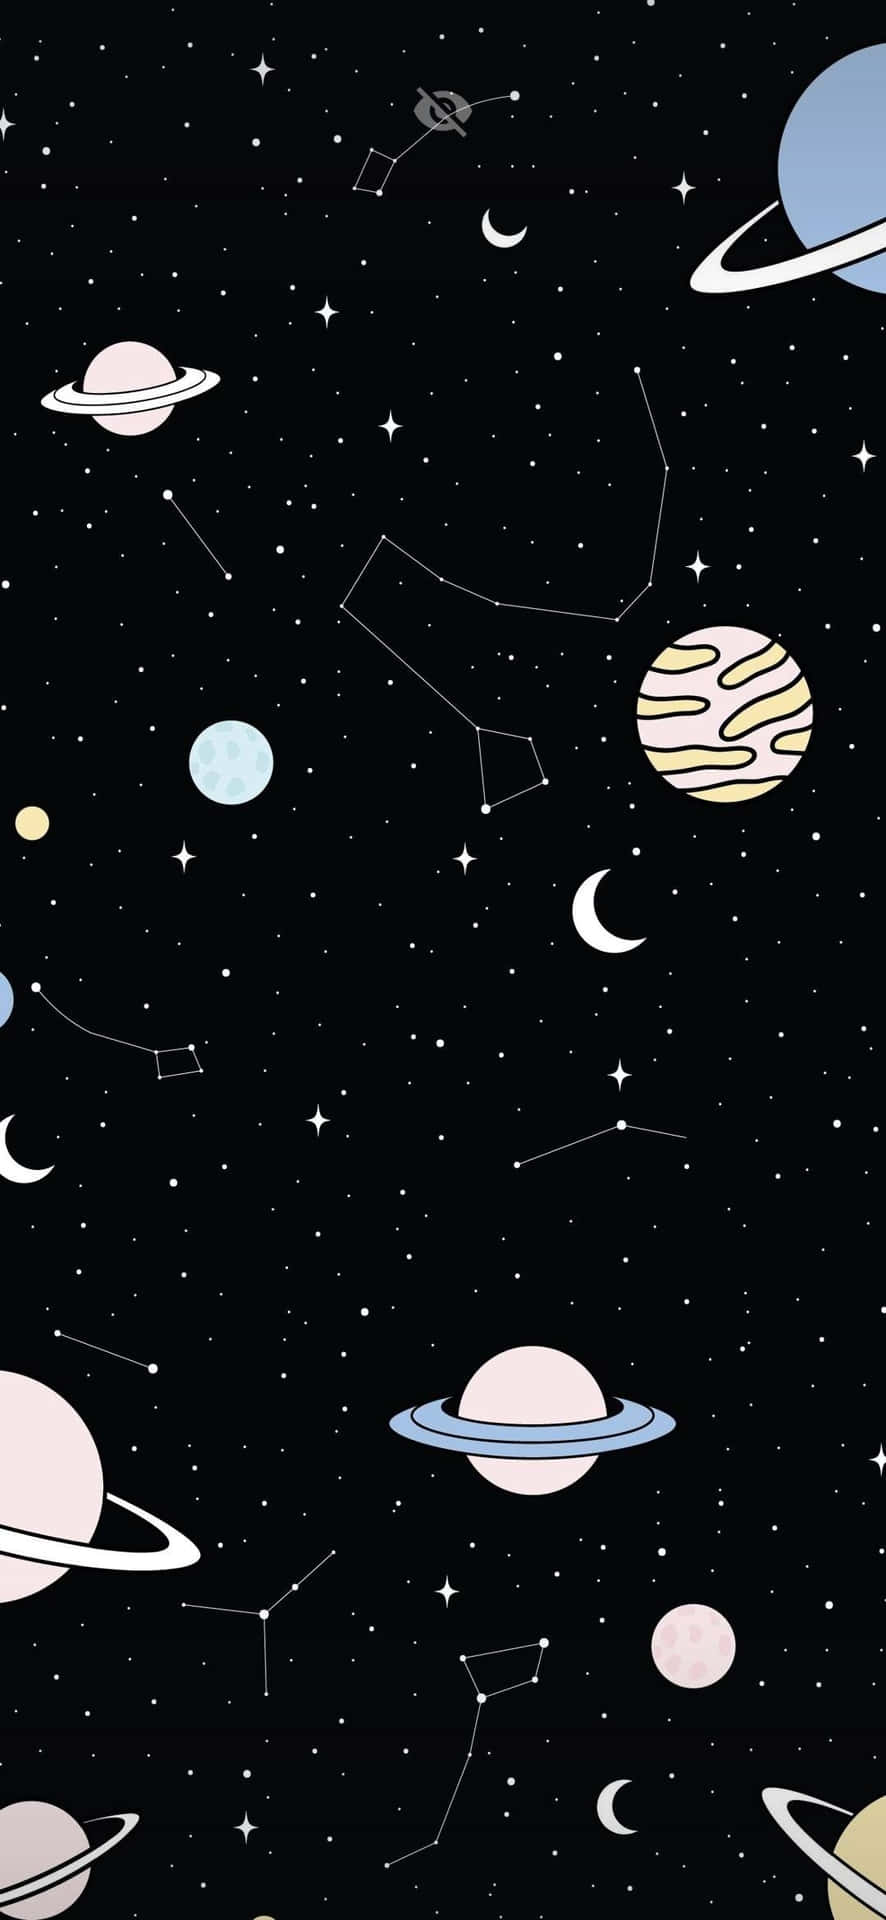 Take a Look at the Beauty of Animated Space Wallpaper